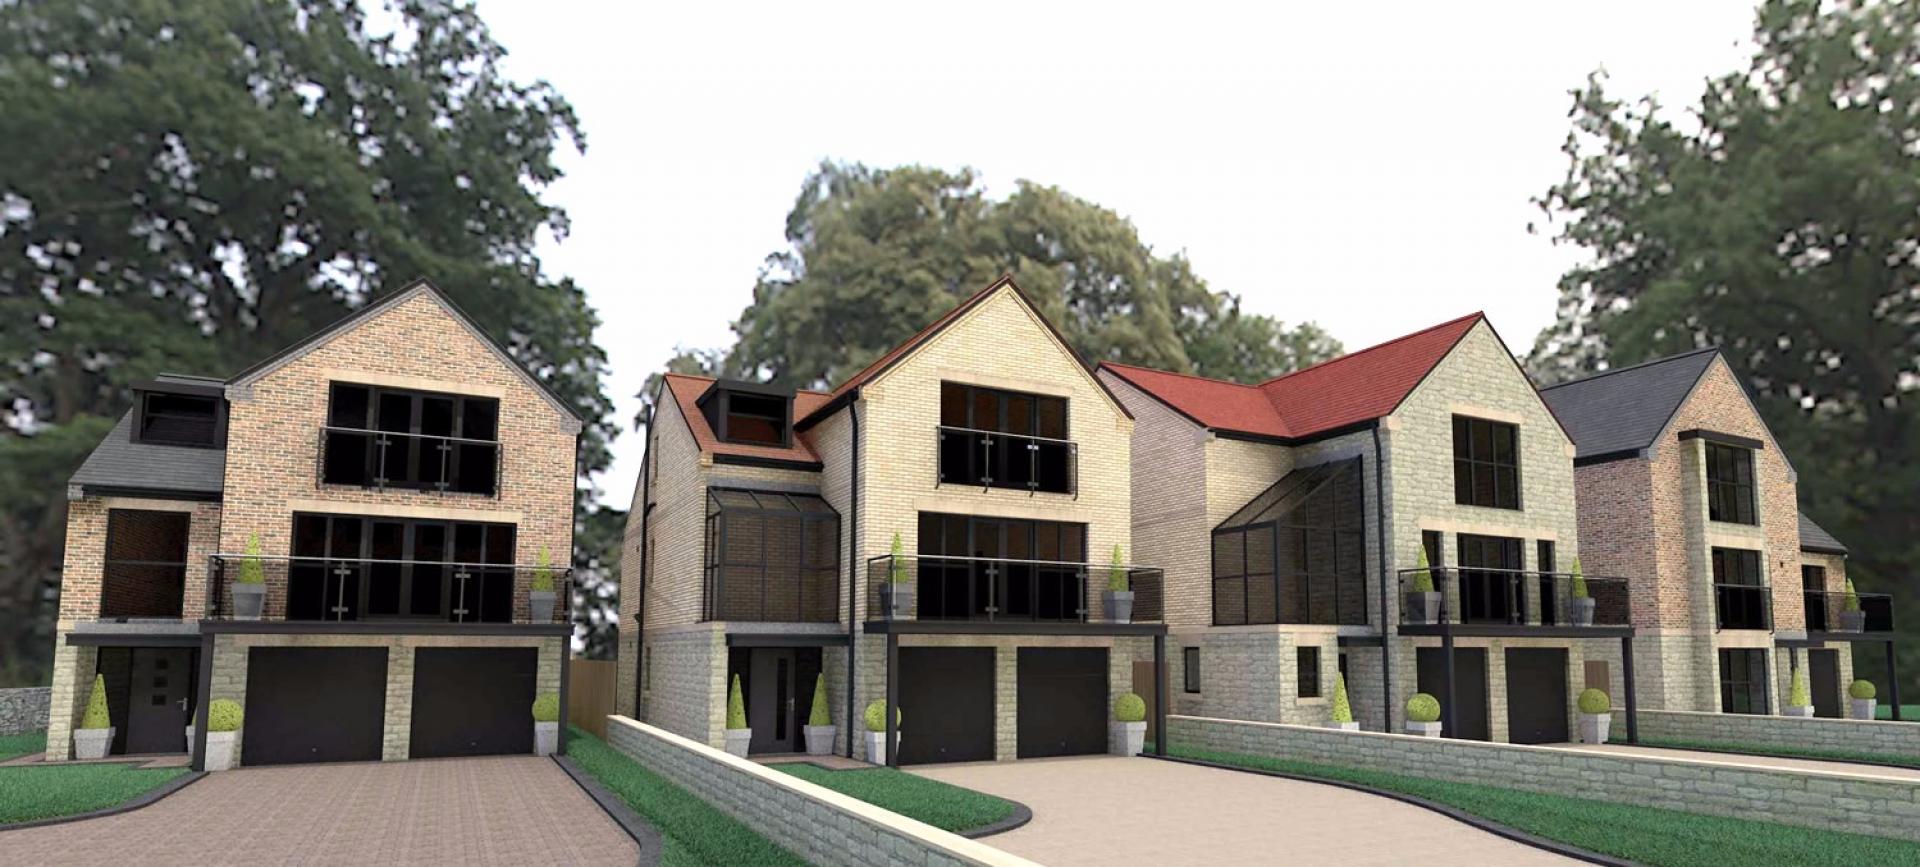 Residential Property Developers Sheffield